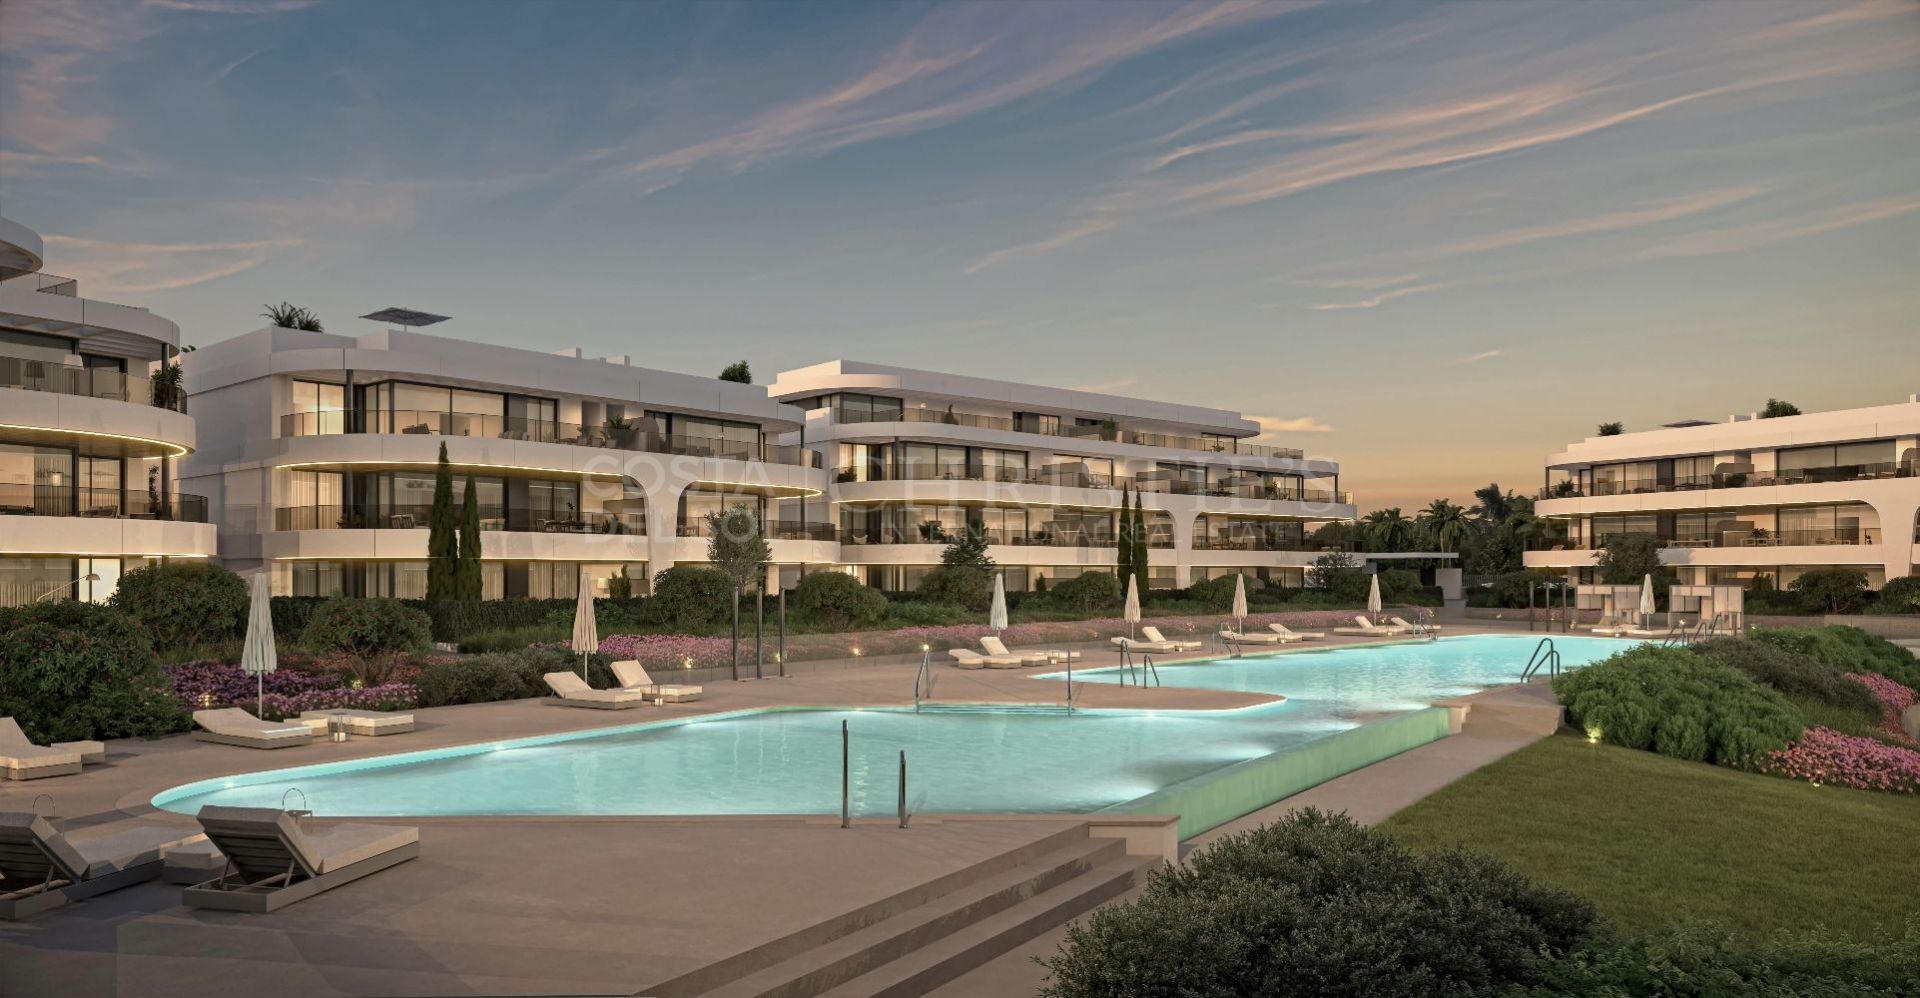 NEW BUILT MODERN APARTMENTS IN THE GOLDEN TRIANGLE ESTEPONA